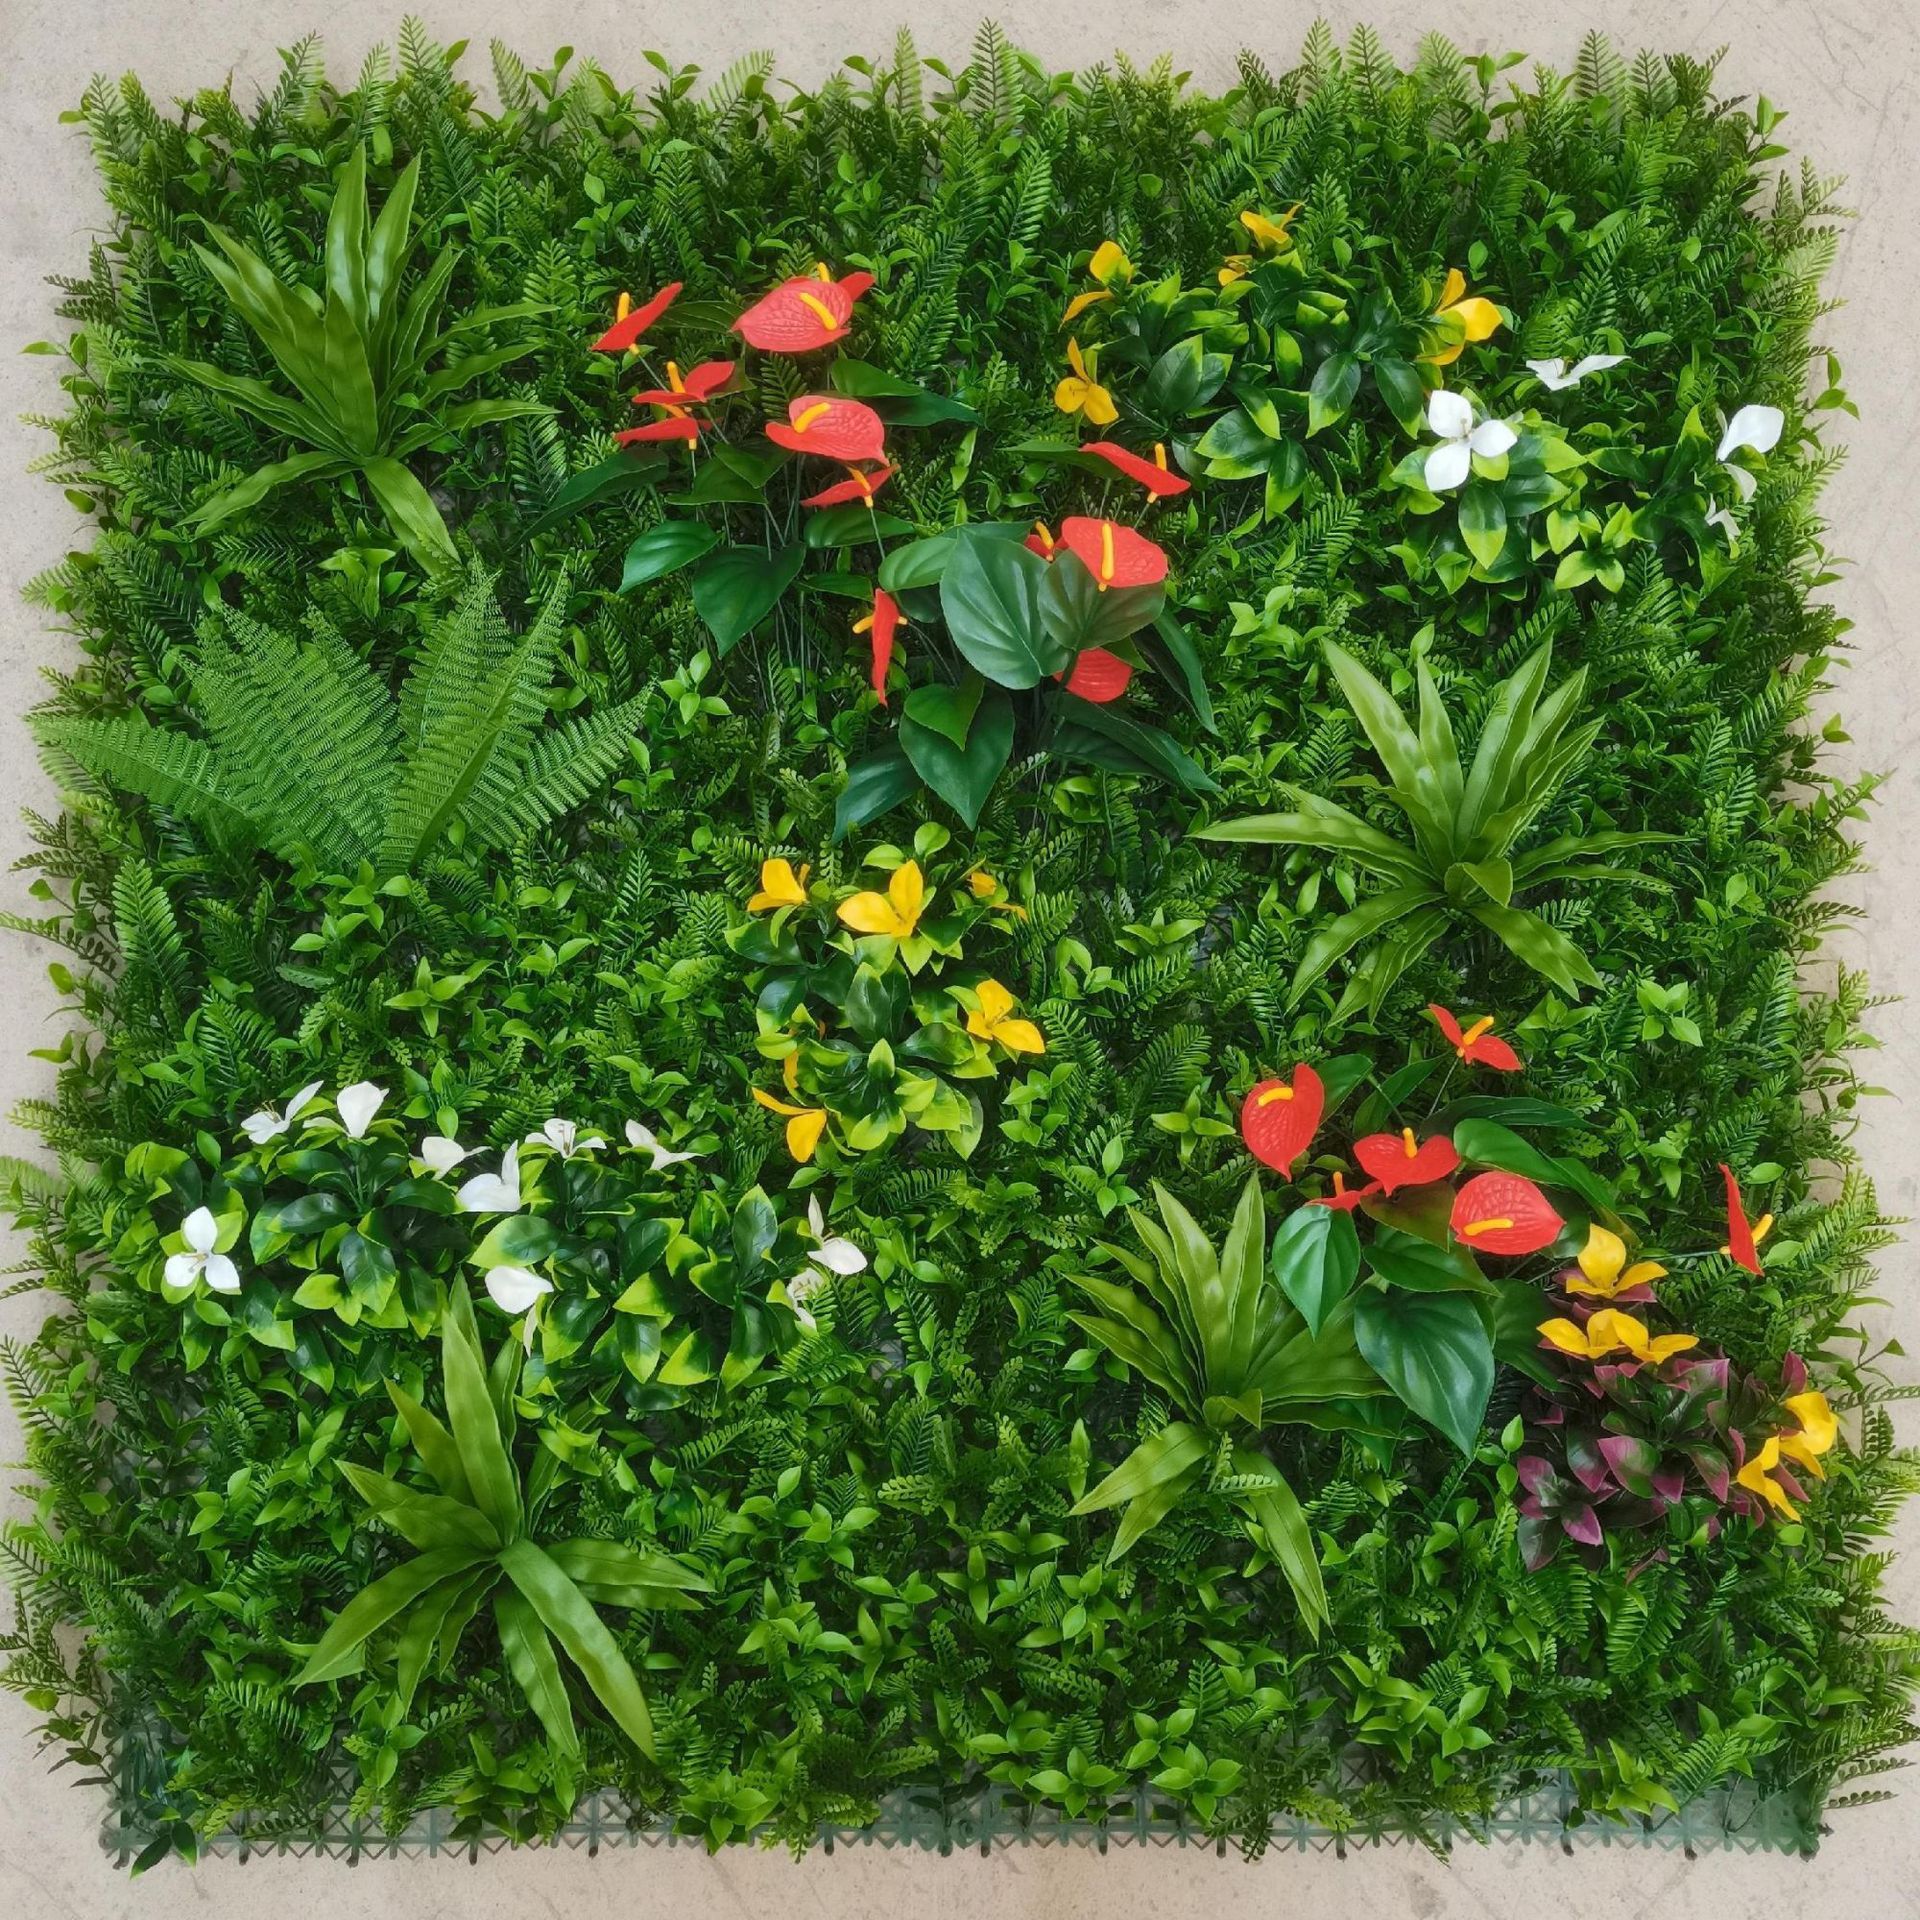 Artificial lawn plant wall green plant plastic fake flowers artificial lawn decoration